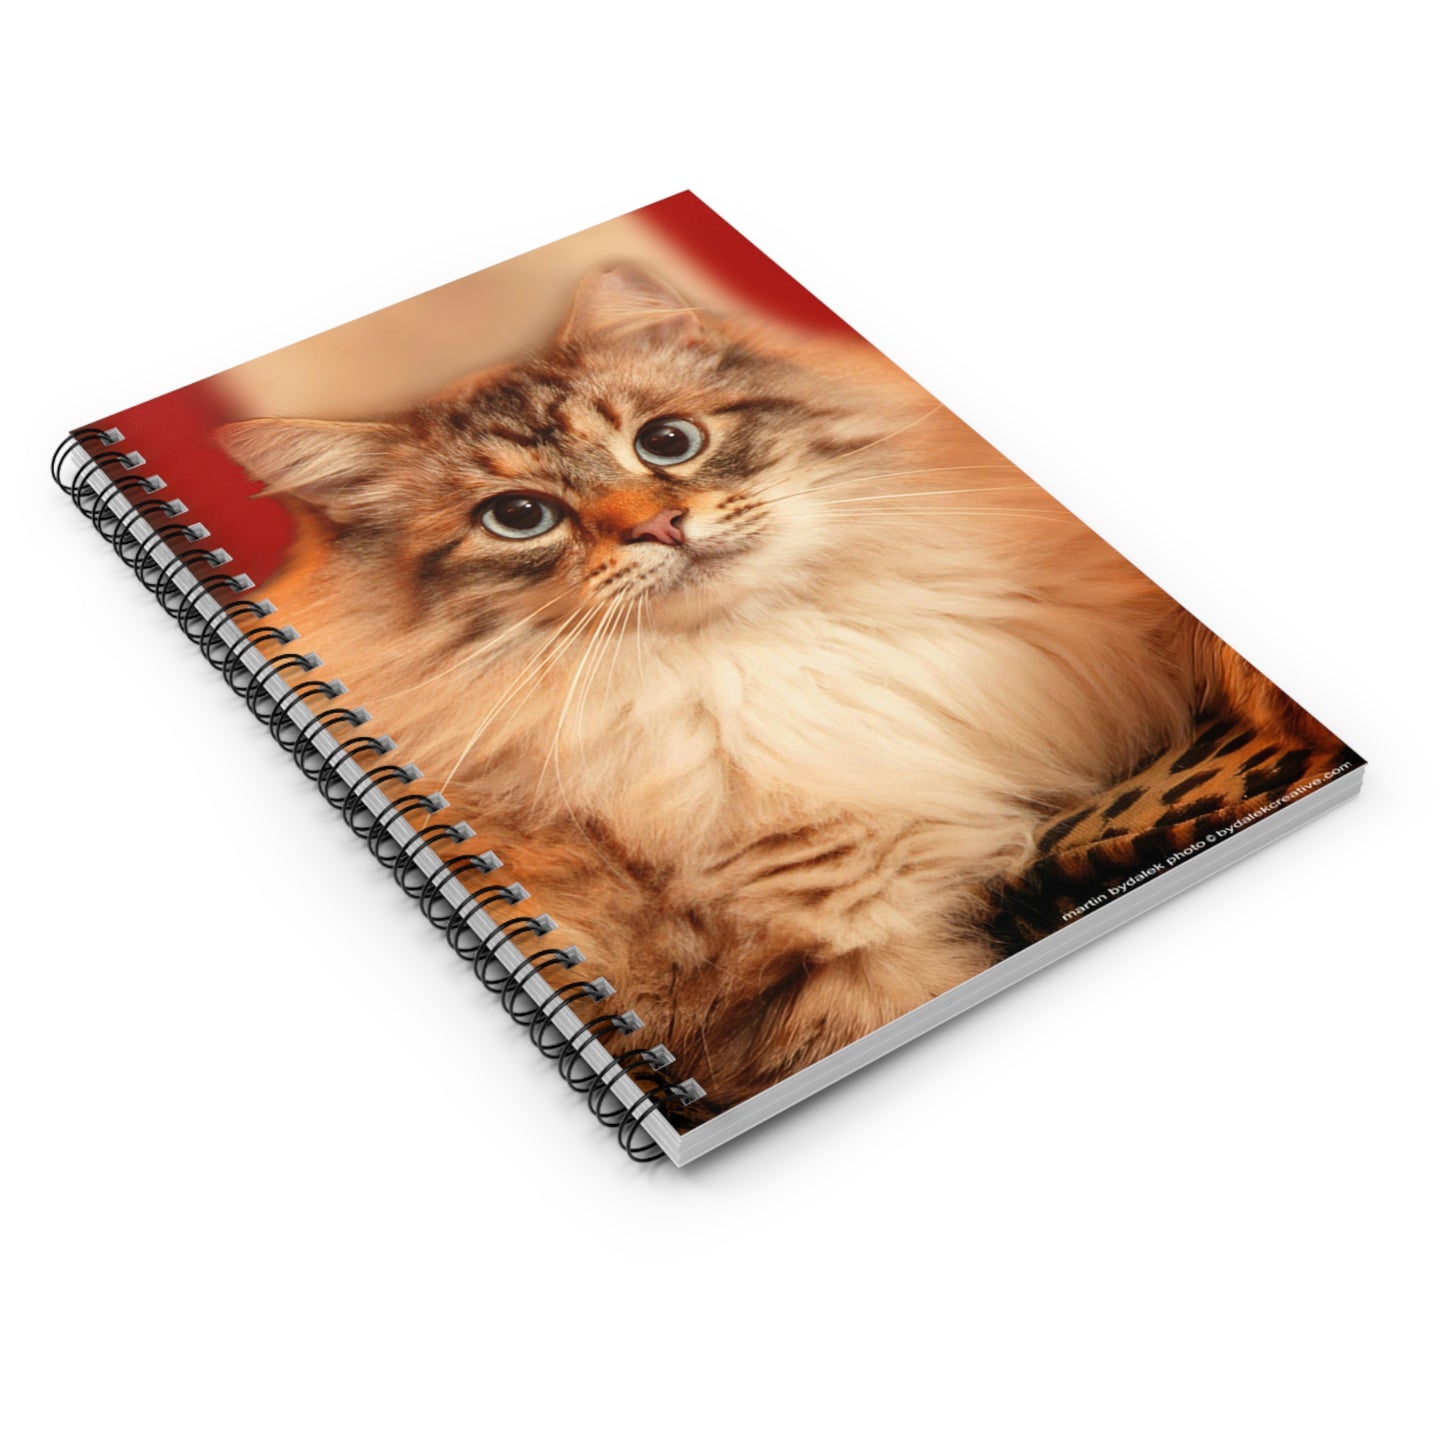 Prince of Maine Spiral Notebook - Ruled Line